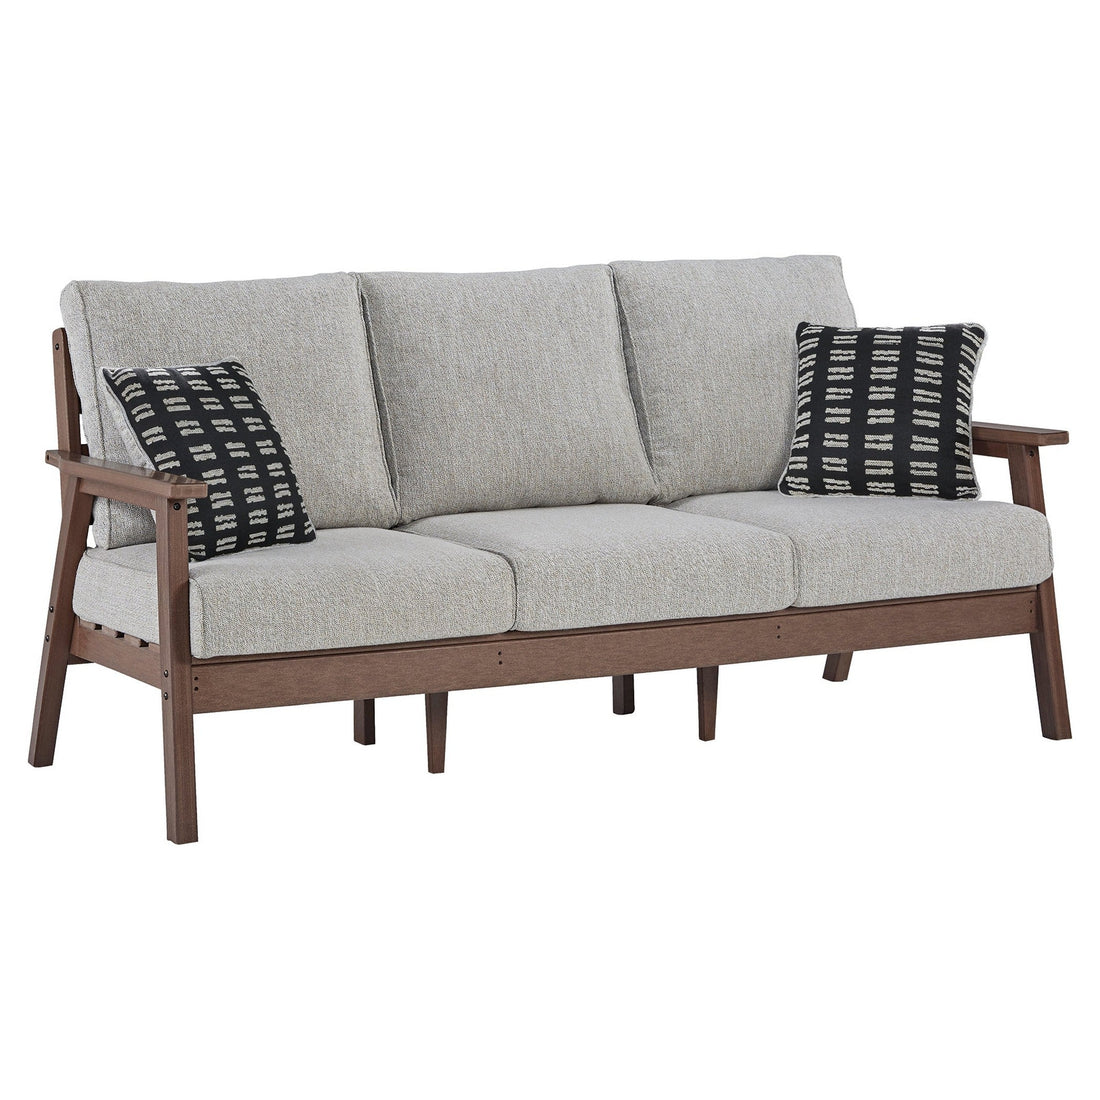 Emmeline Outdoor Sofa with Cushion Ash-P420-838